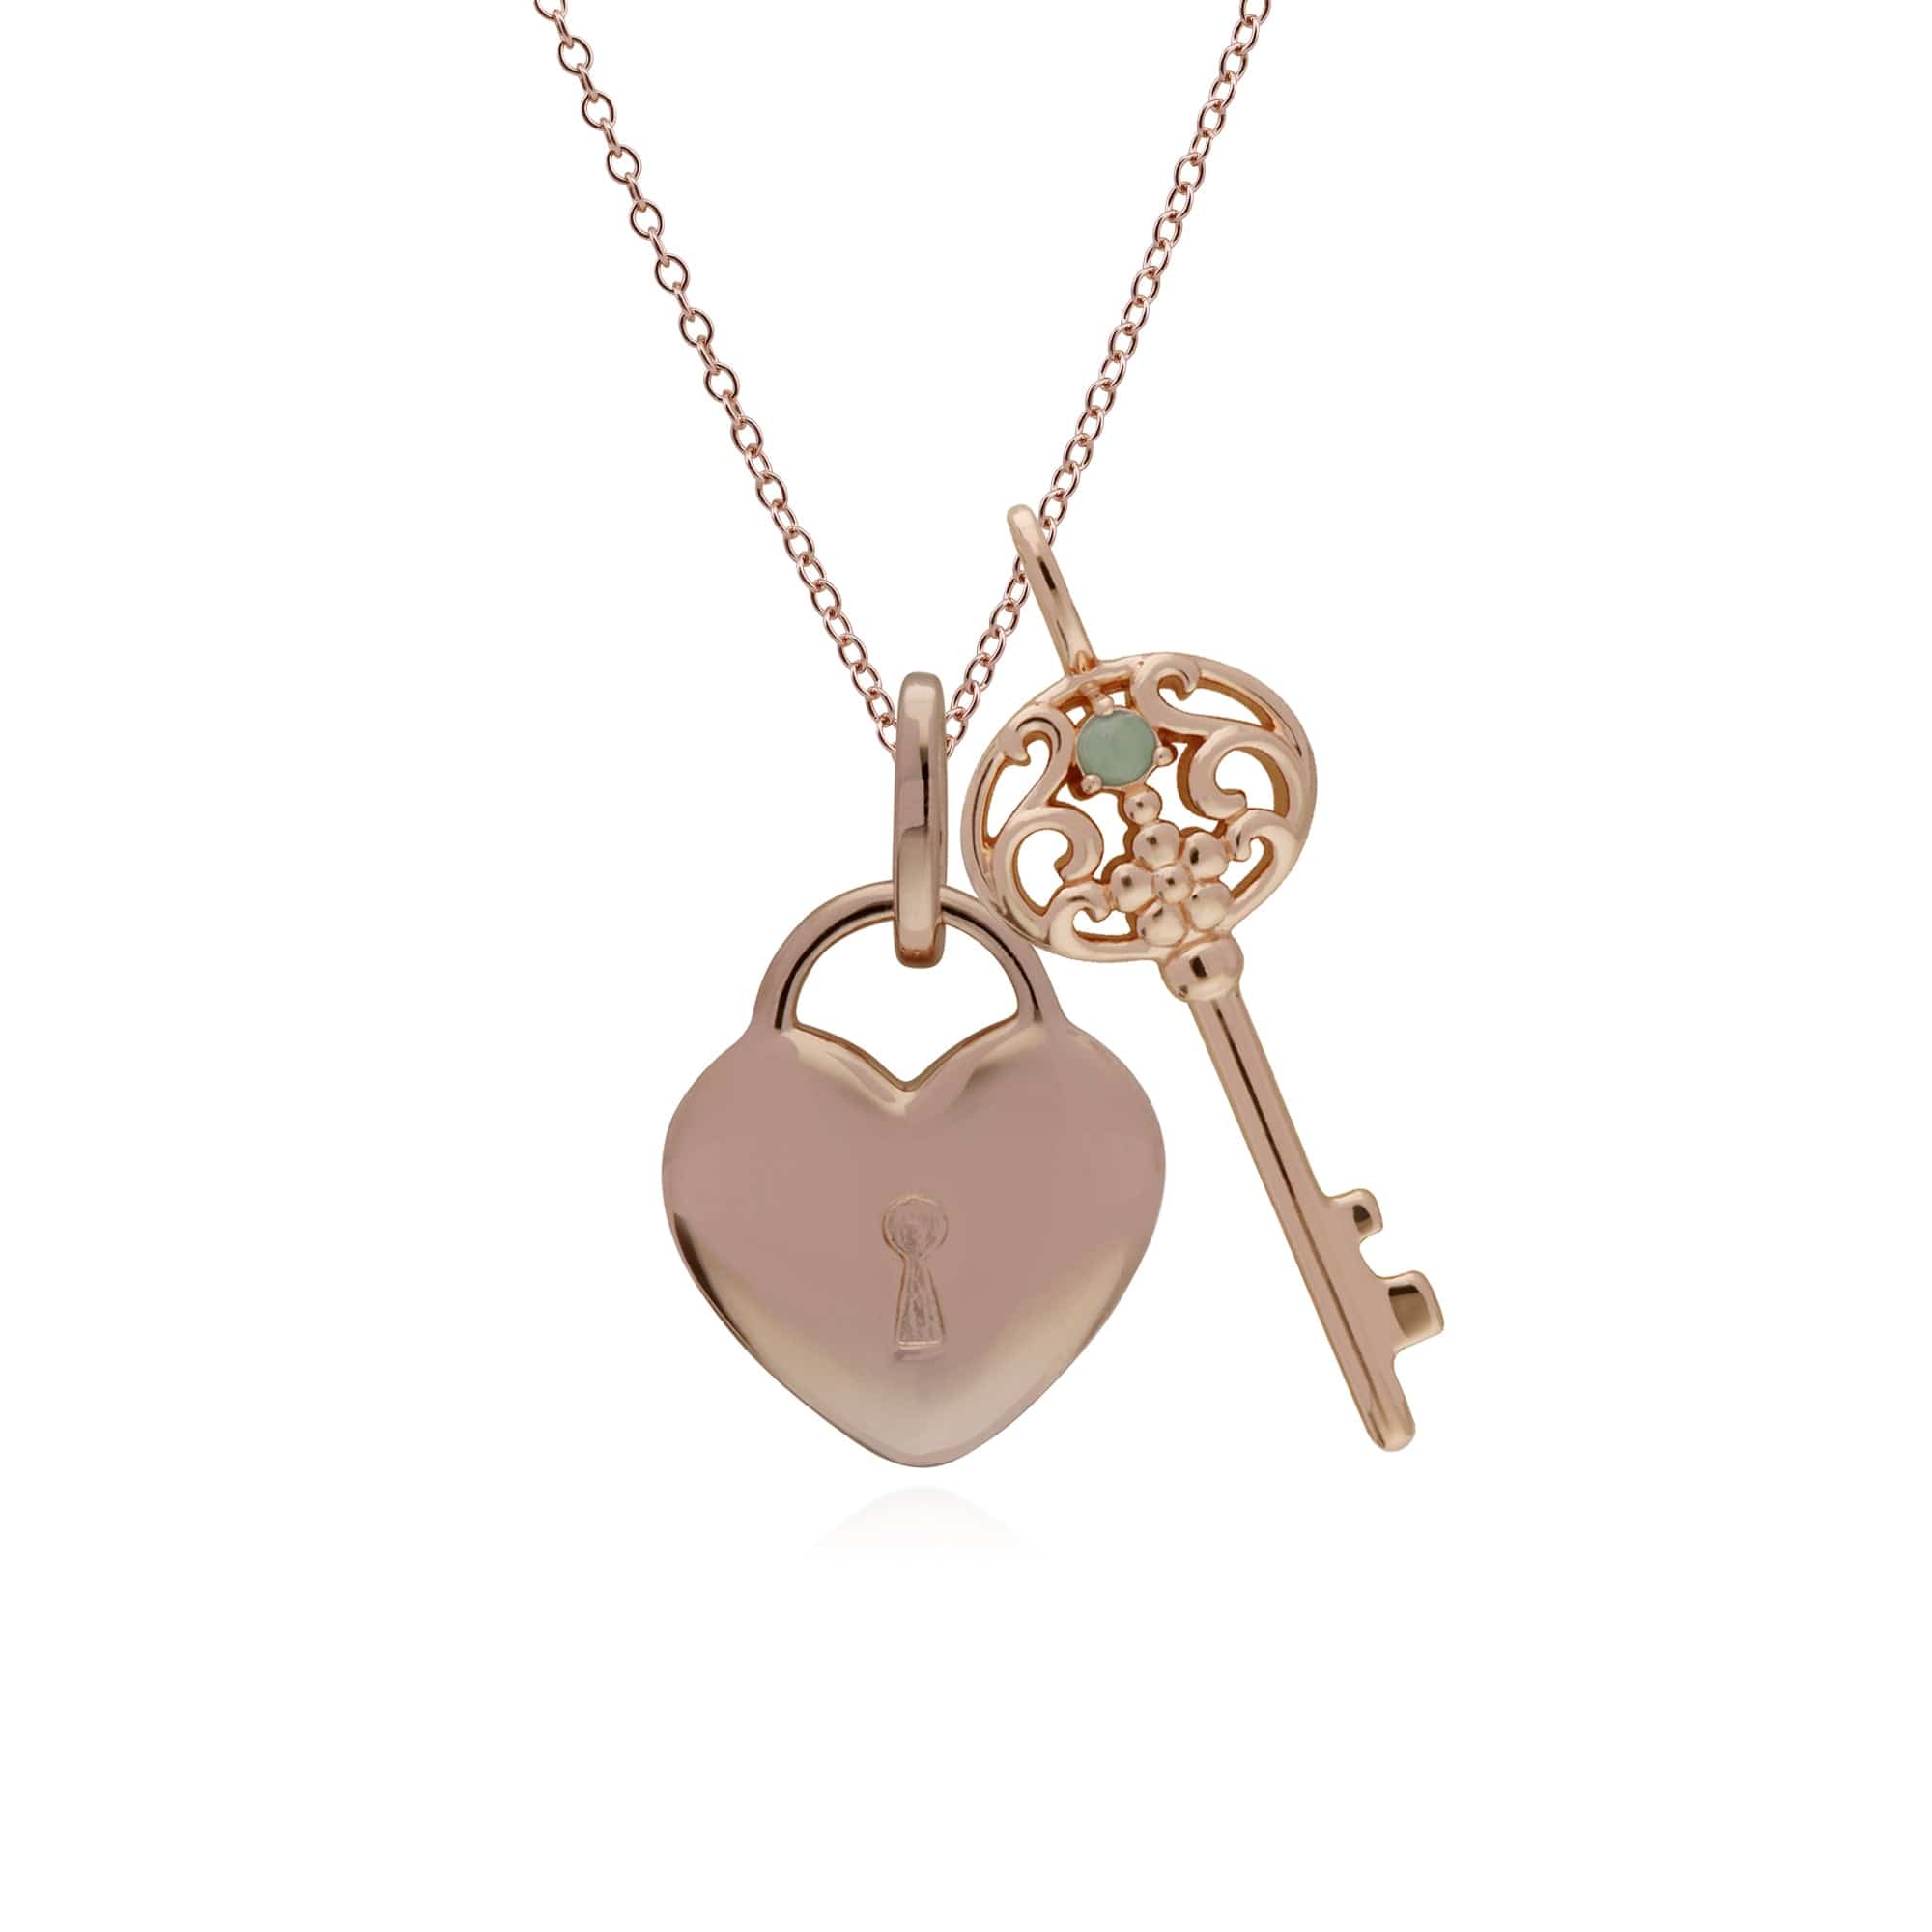 270P026712925-270P026901925 Classic Heart Lock Pendant & Jade Big Key Charm in Rose Gold Plated 925 Sterling Silver 1